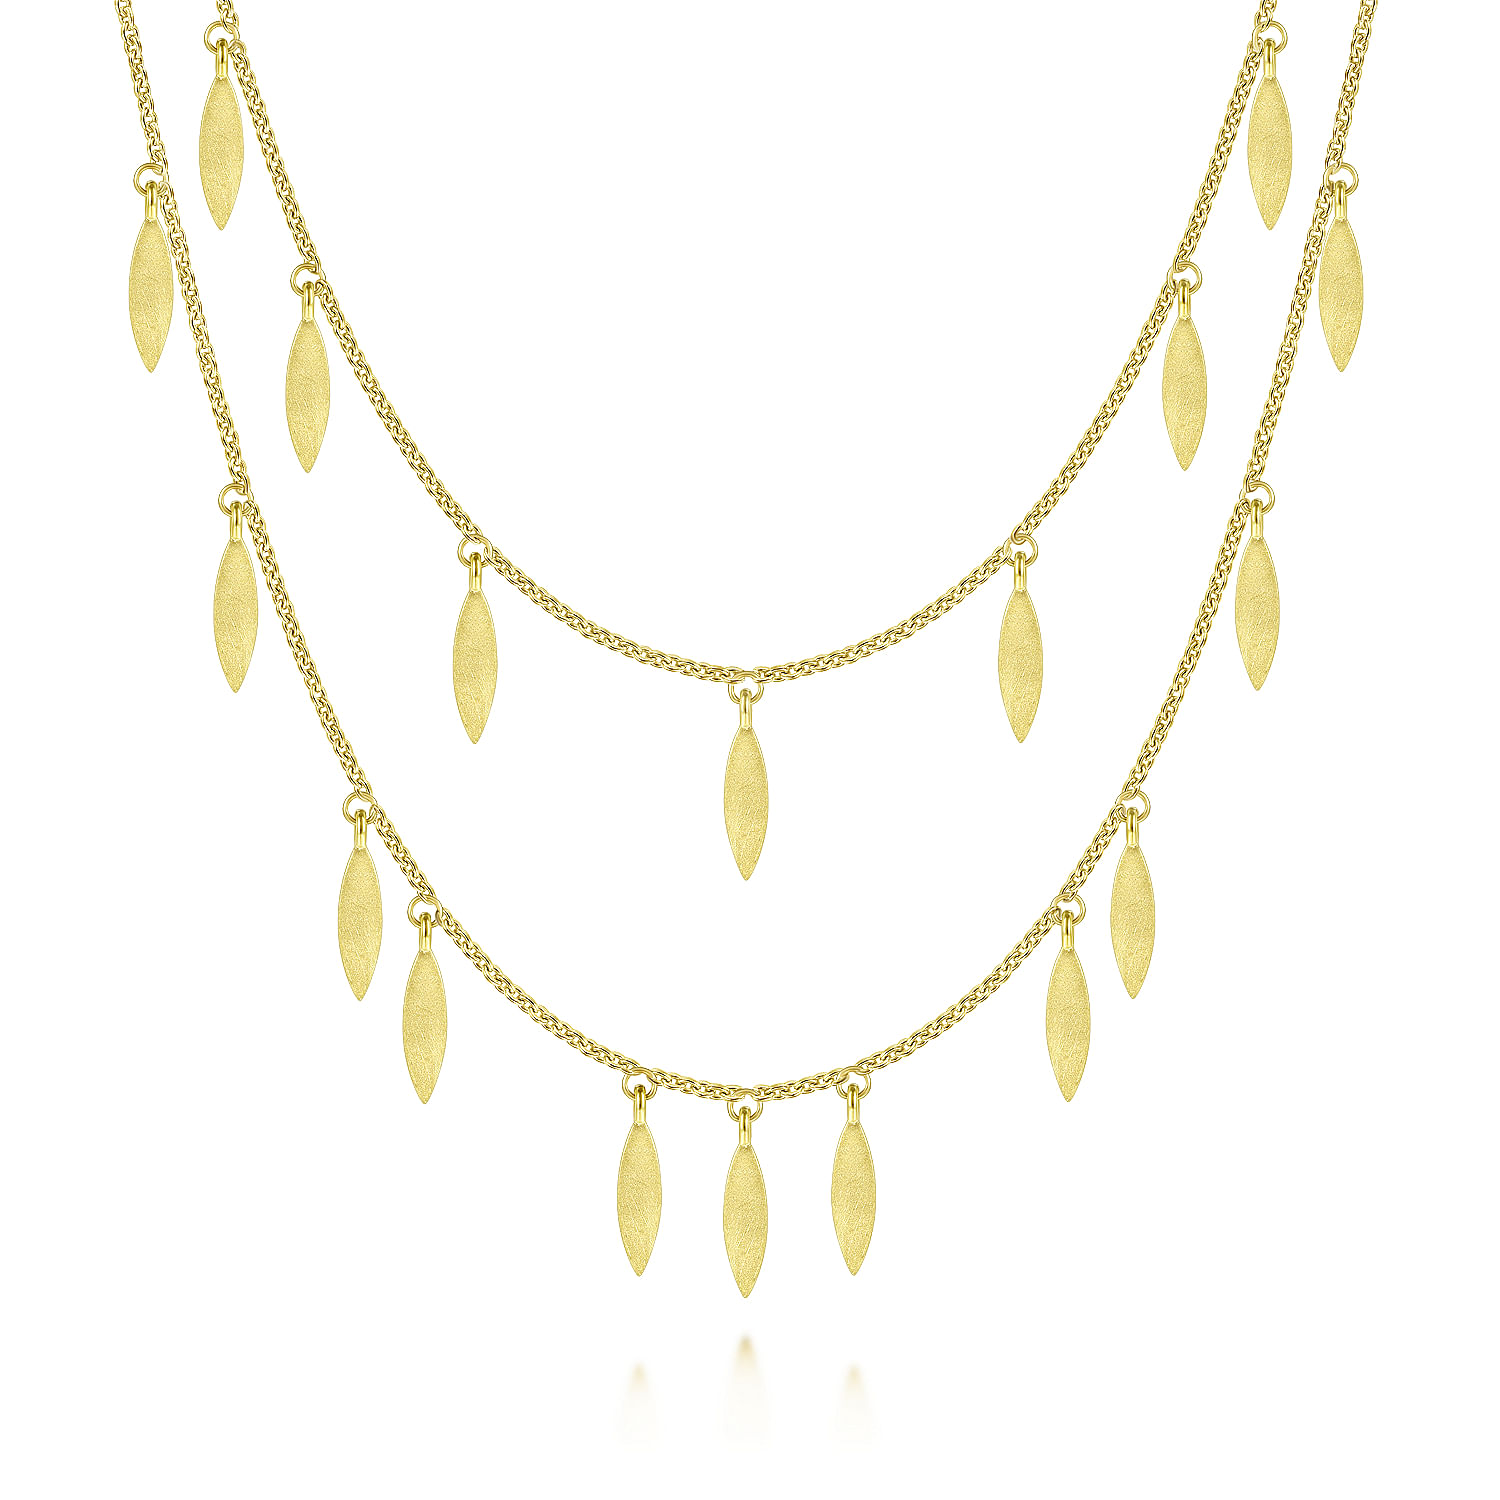 14K Yellow Gold Two Strand Necklace with Marquise Shape Drops